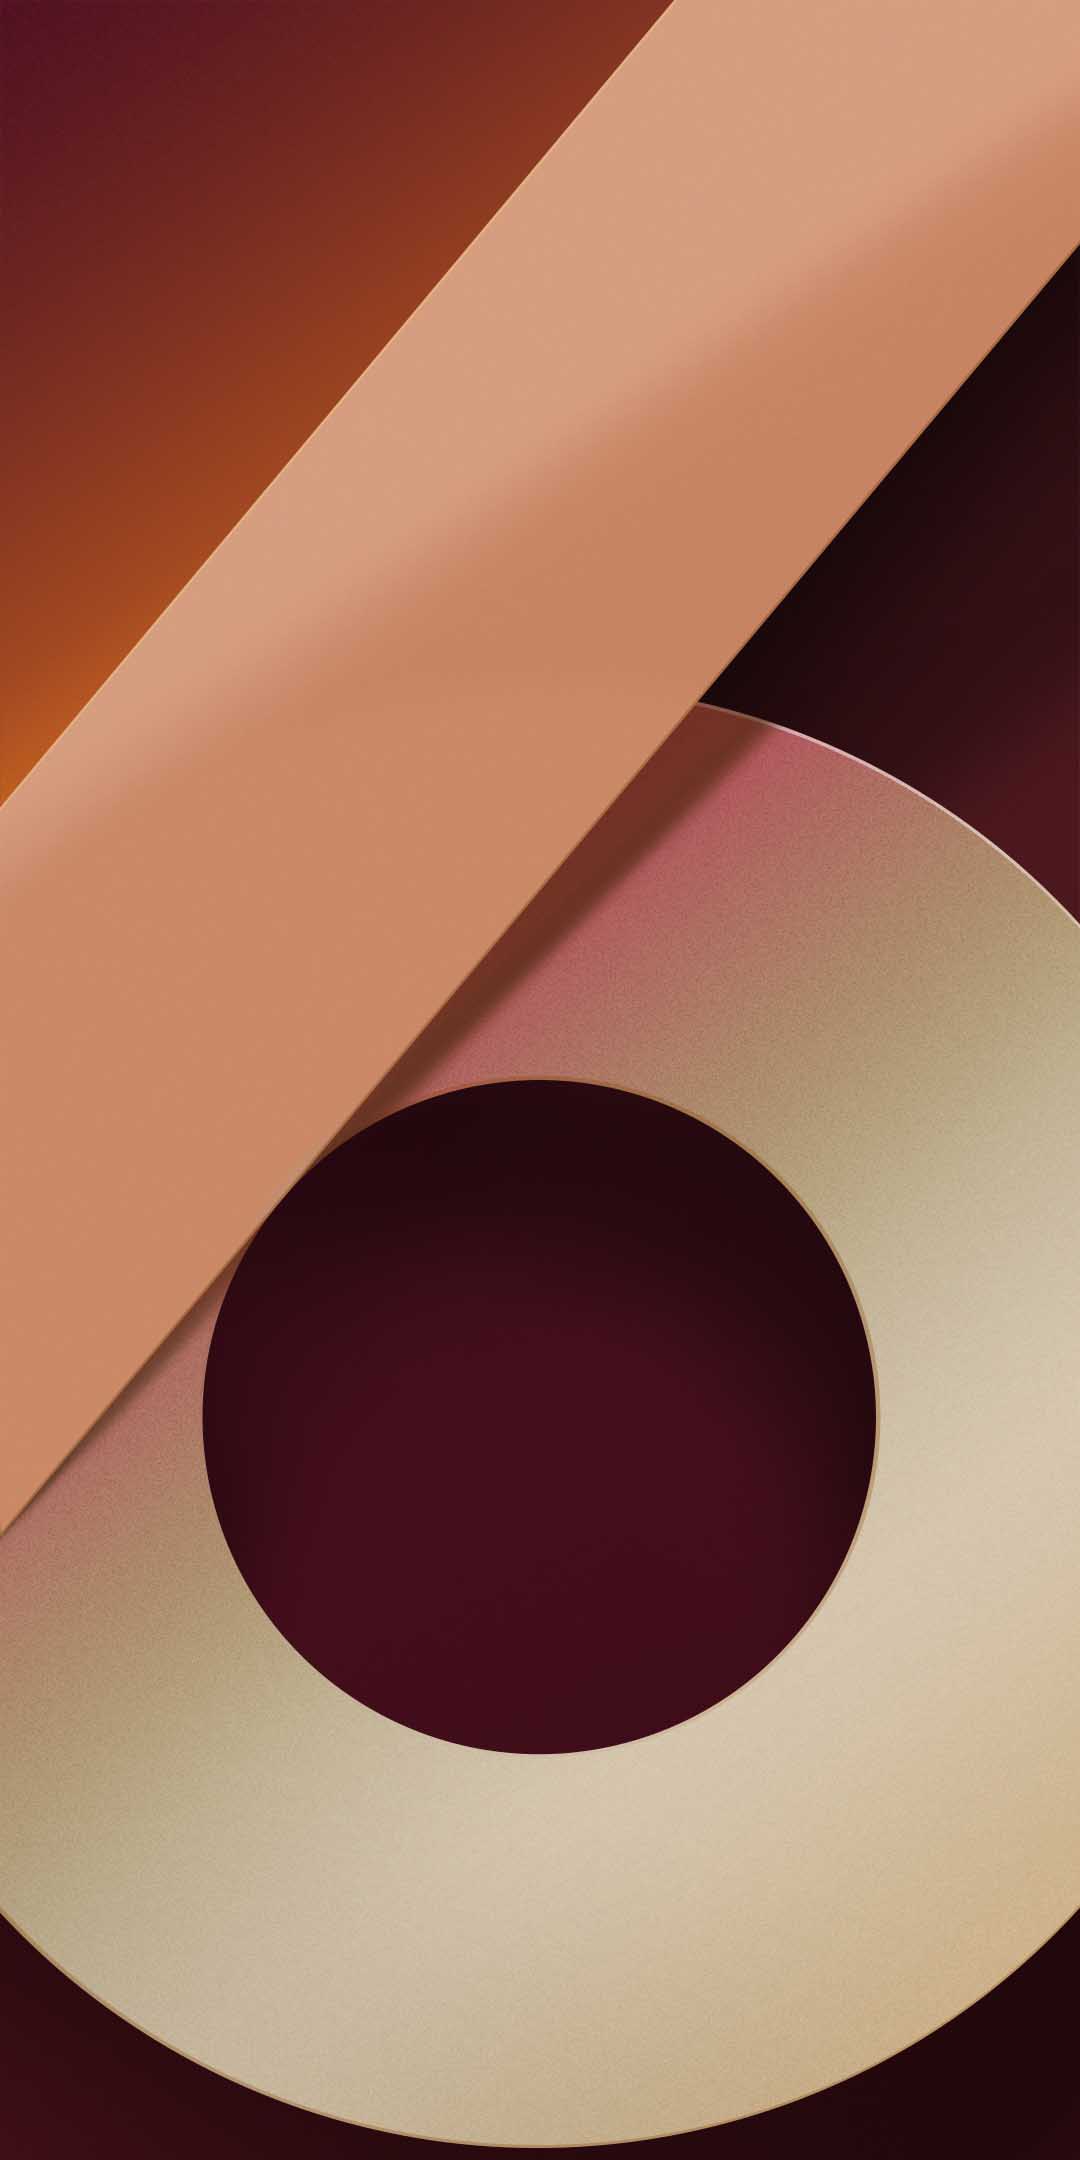 Download LG Q6 Stock Wallpapers | DroidViews